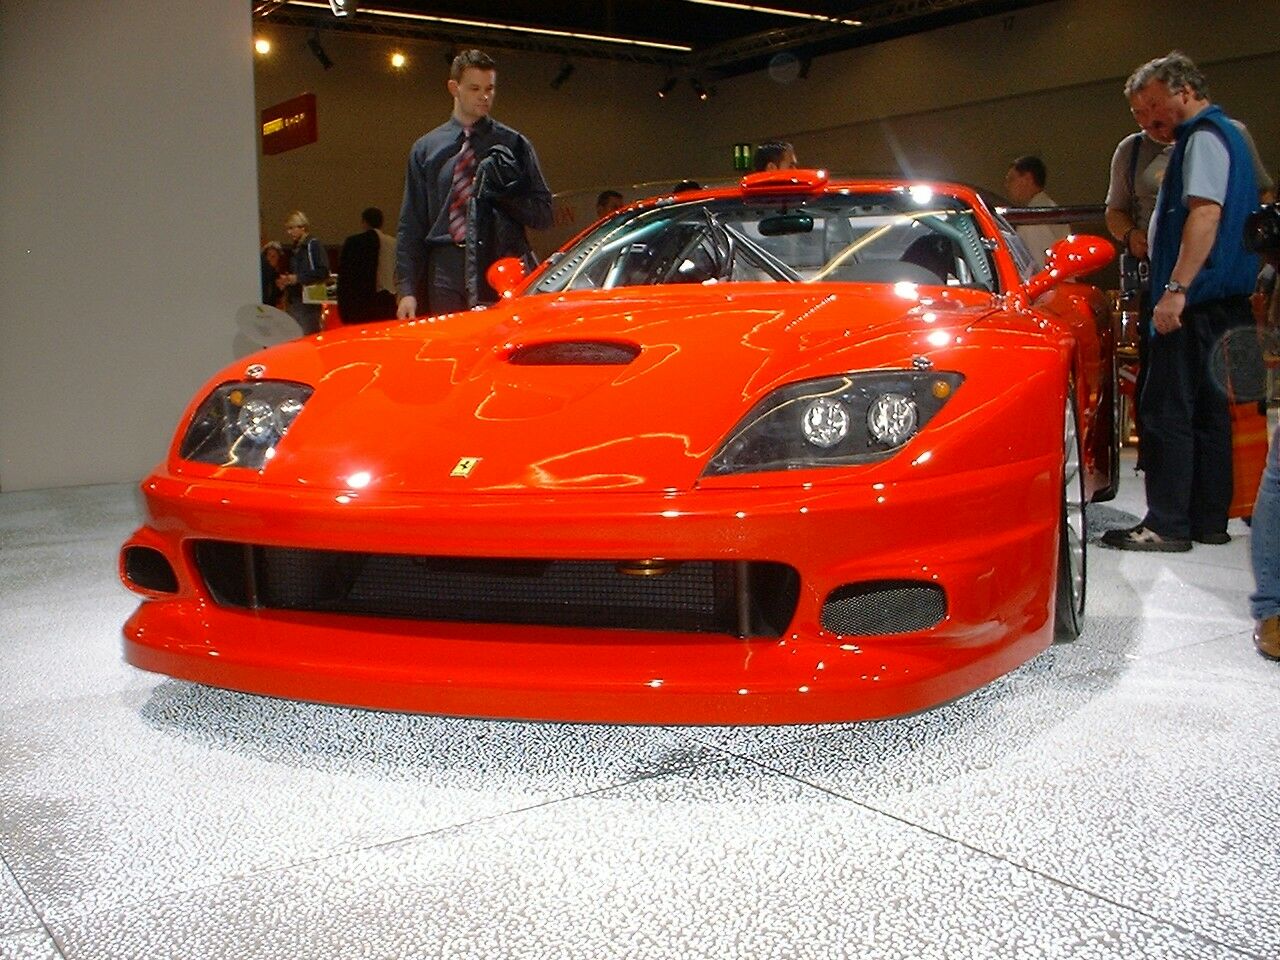 The Ferrari 575GTC is unveiled at the 2003 Frankfurt Motor Show